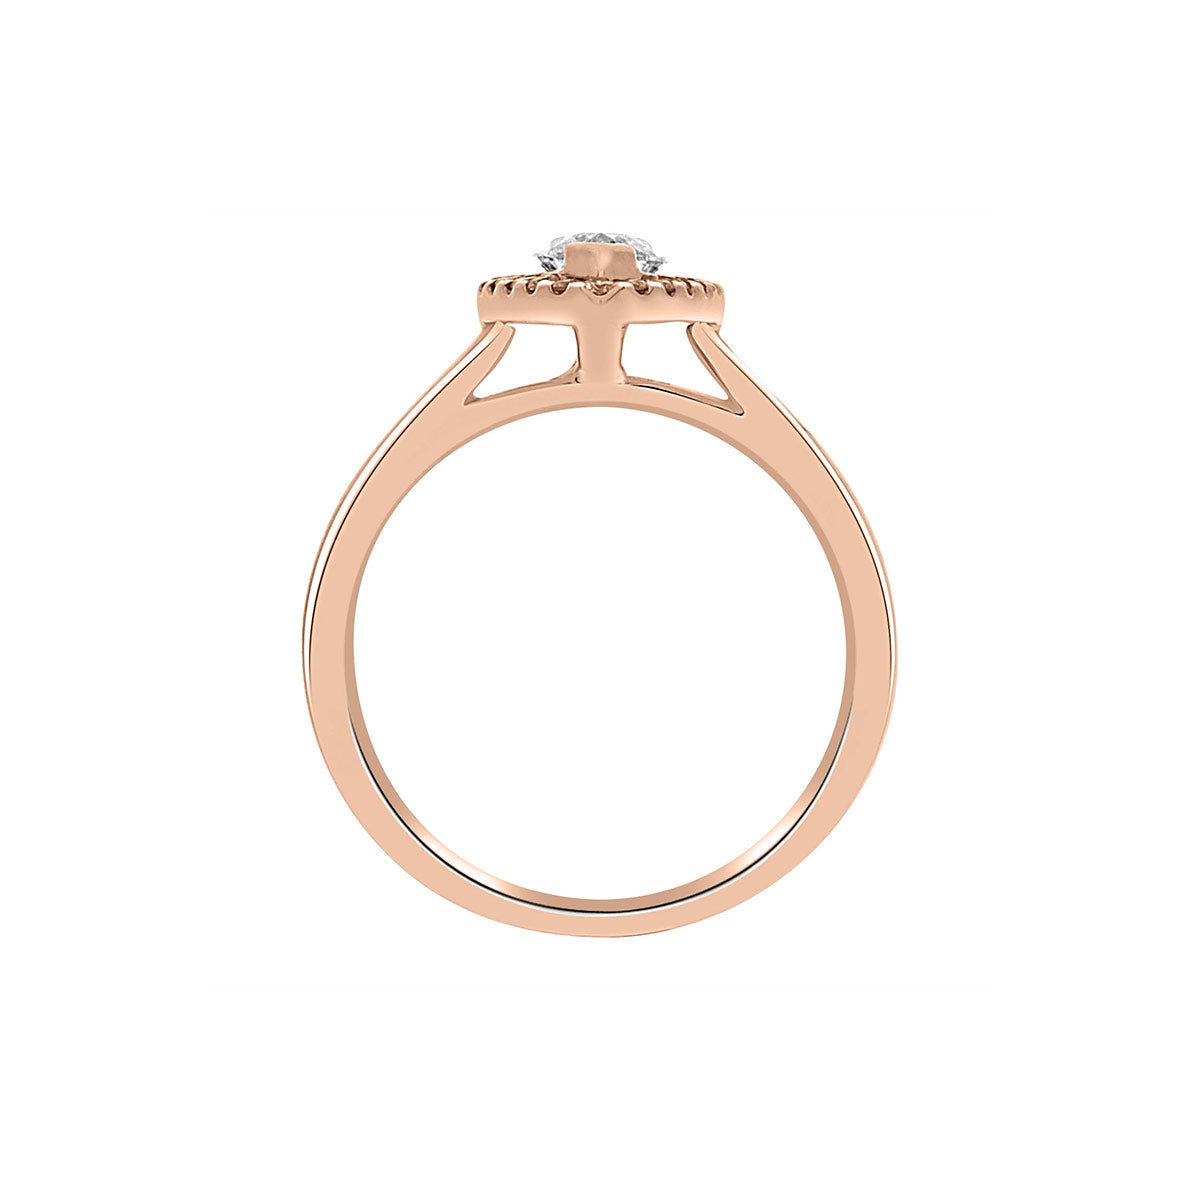 Marquise Cut Halo Ring in rose gold in an upright position